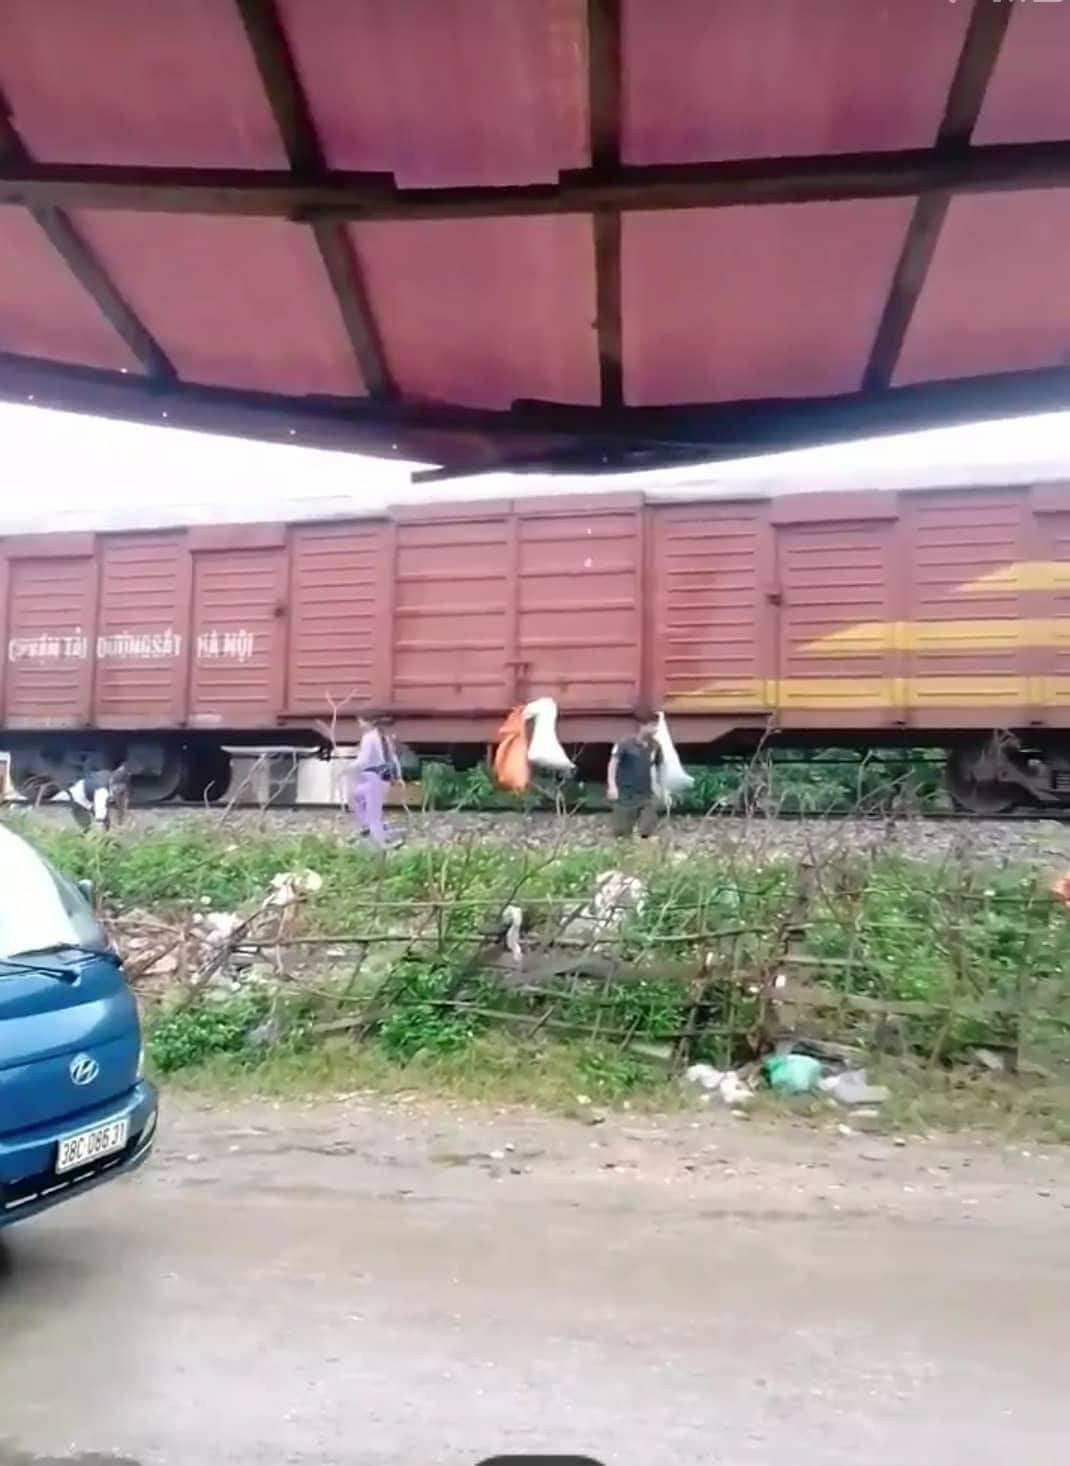 Locals hang their bags of trash on the train at Huong Pho Station.